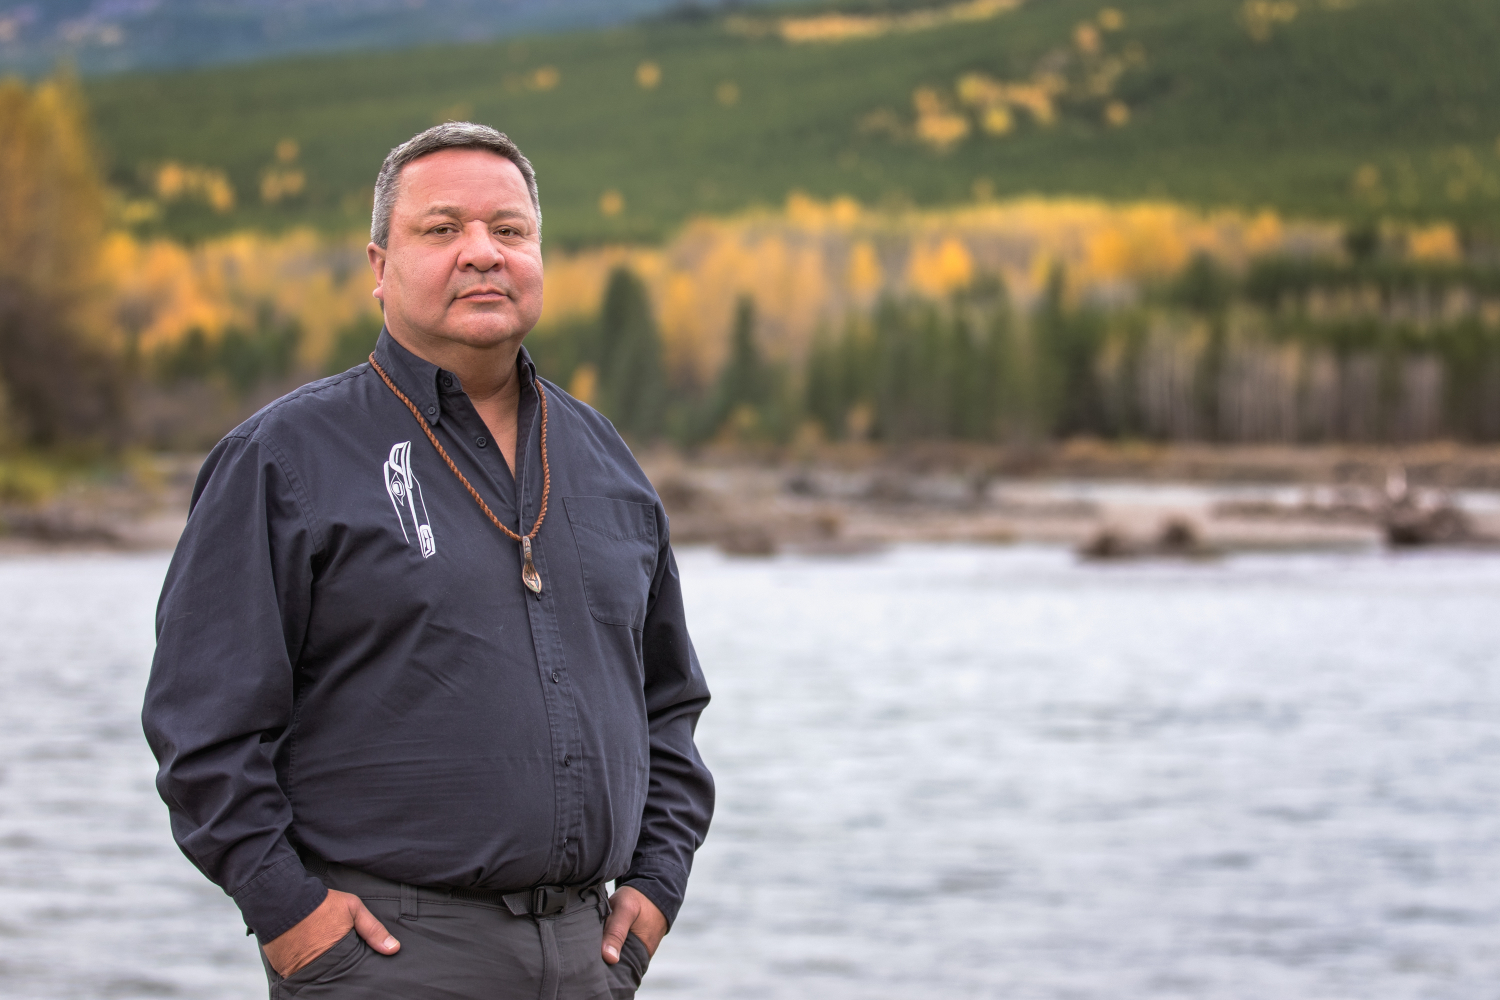 Kirby Muldoe, an indigenous man with short grey hair in a navy shirt, standing in front of a river. Photo by Carla Lewis Photography